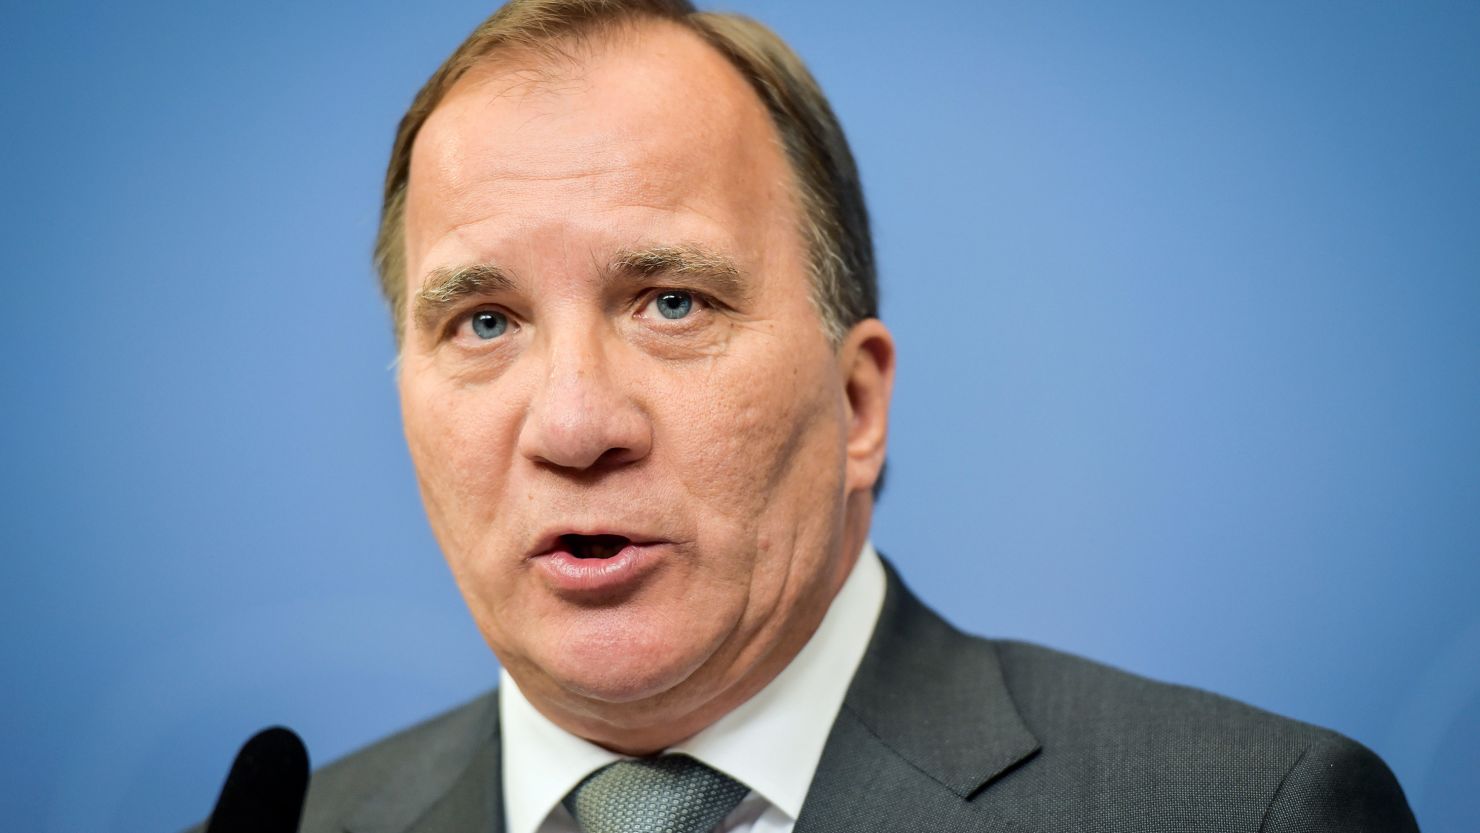 Sweden's PM Stefan Lofven at a news conference about the huge leak of confidential information.